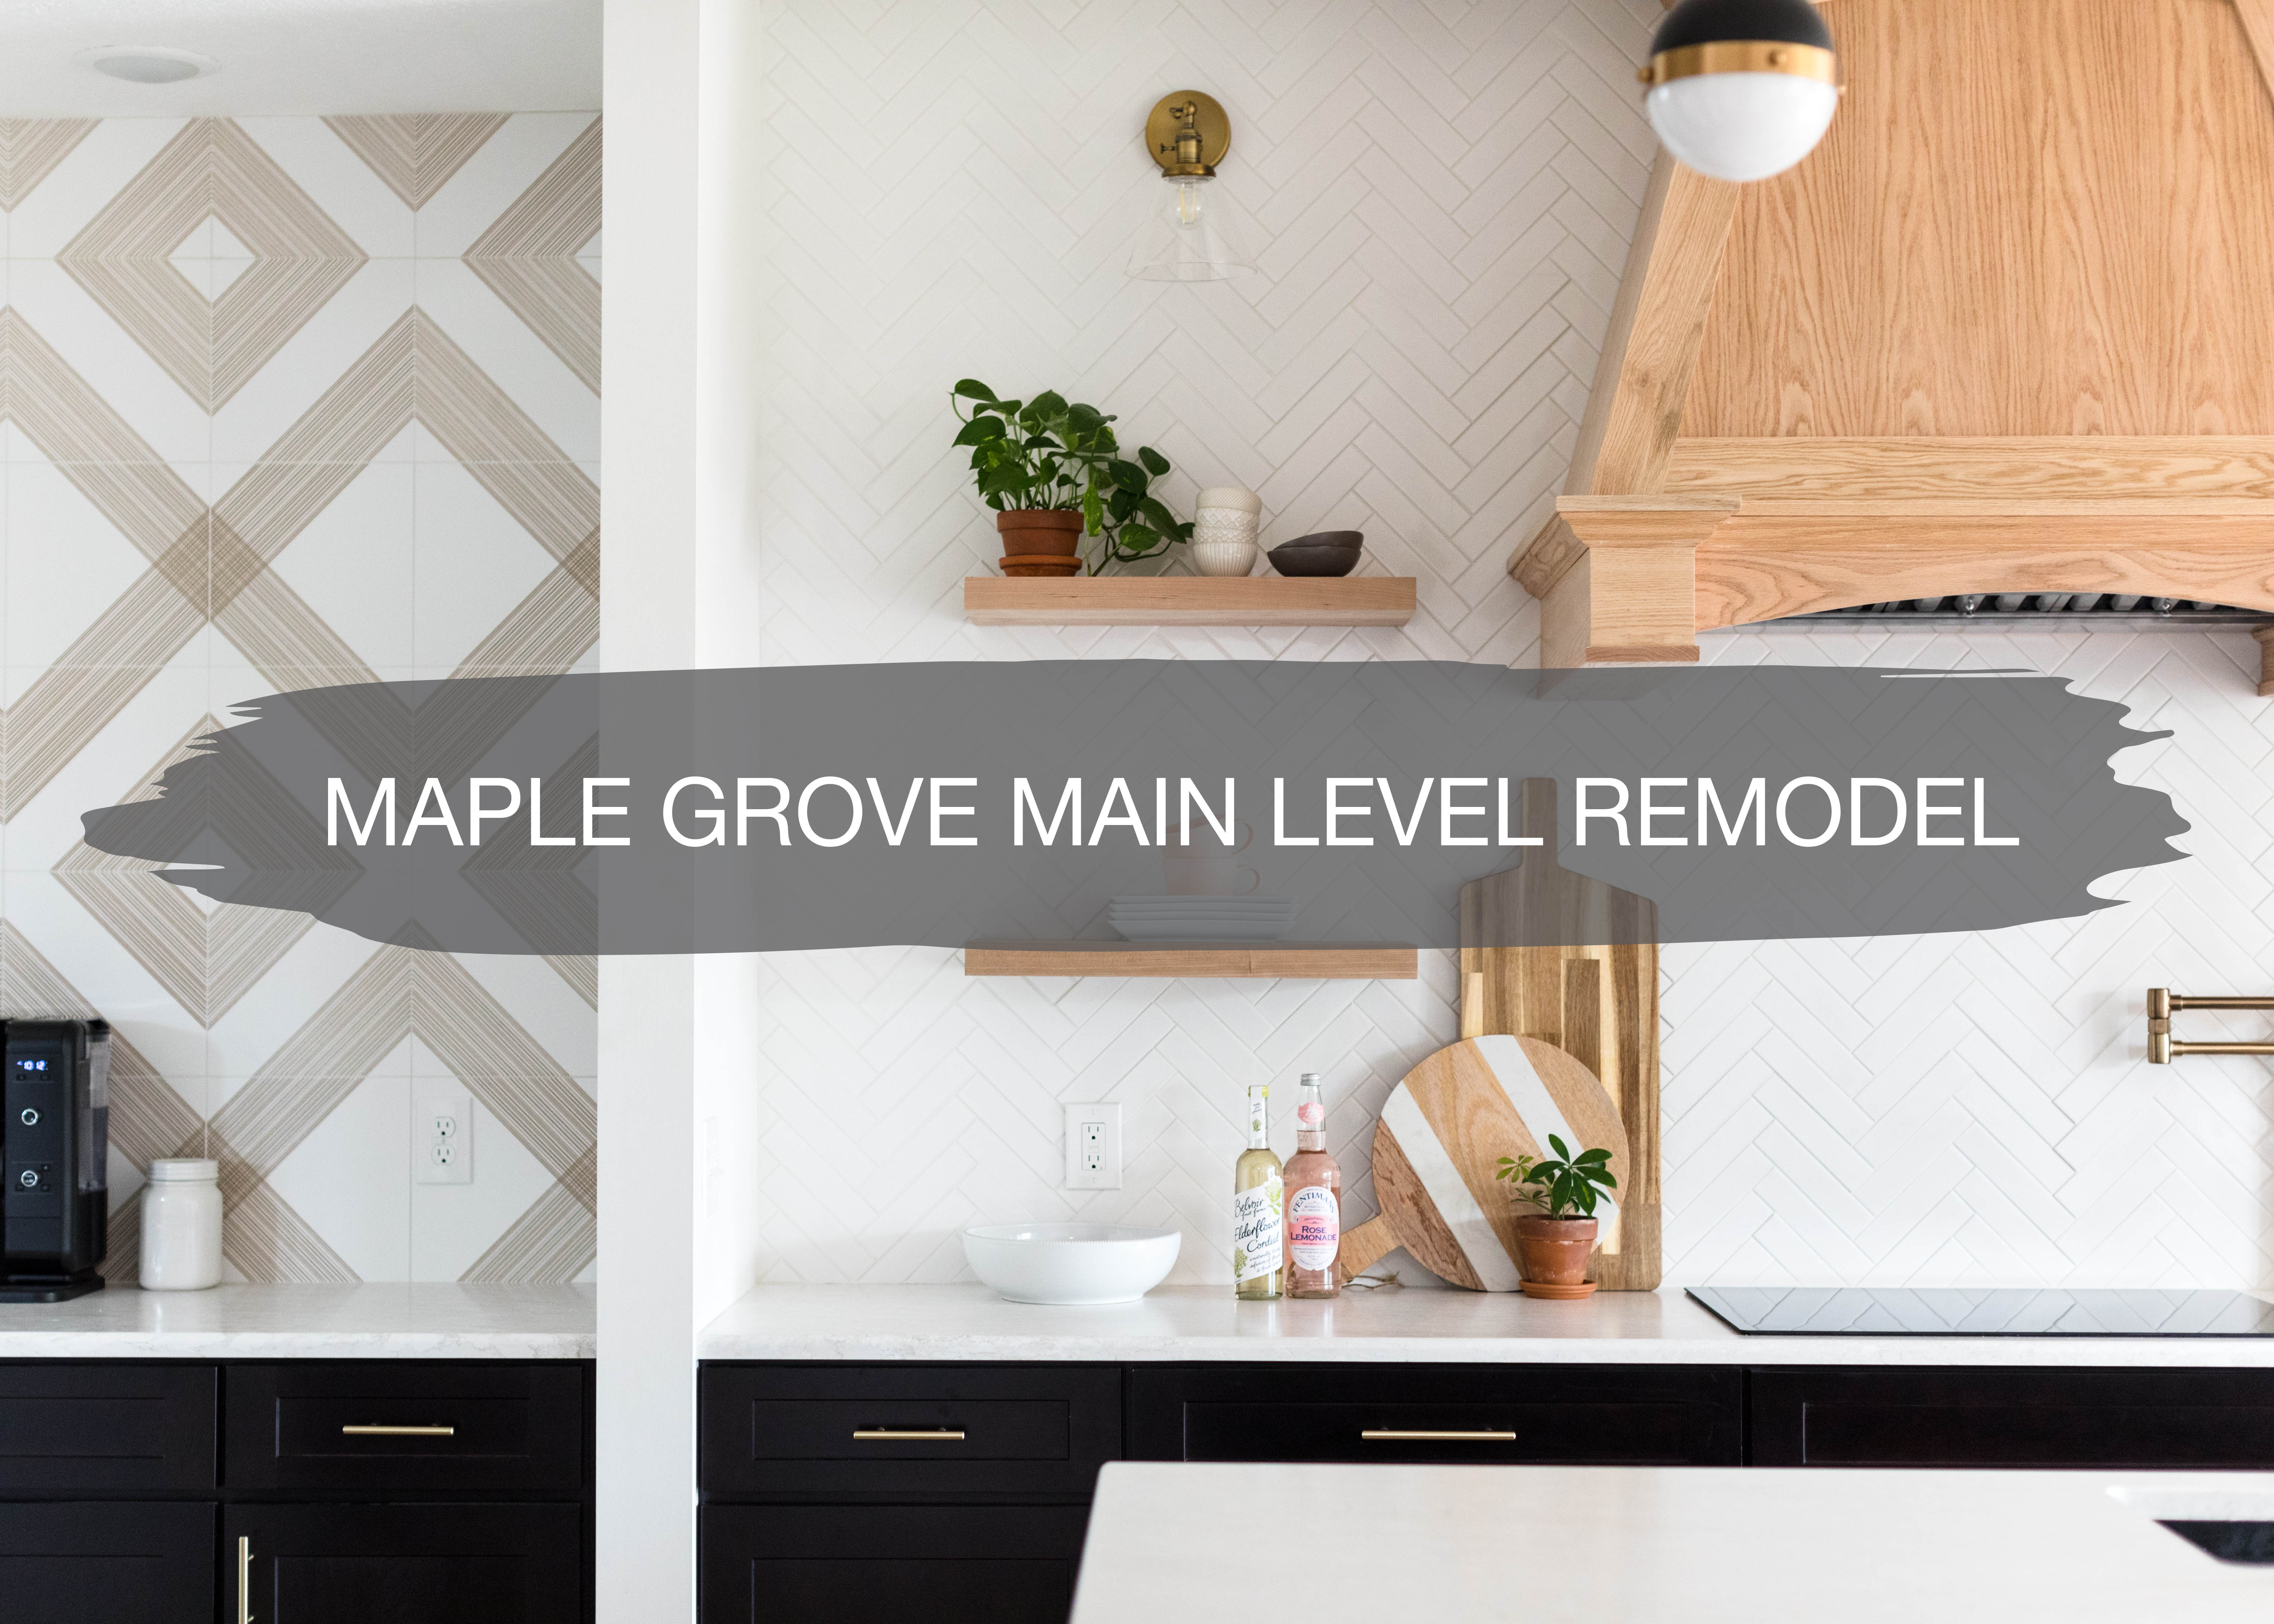 Maple Grove Main Level Remodel | construction2style